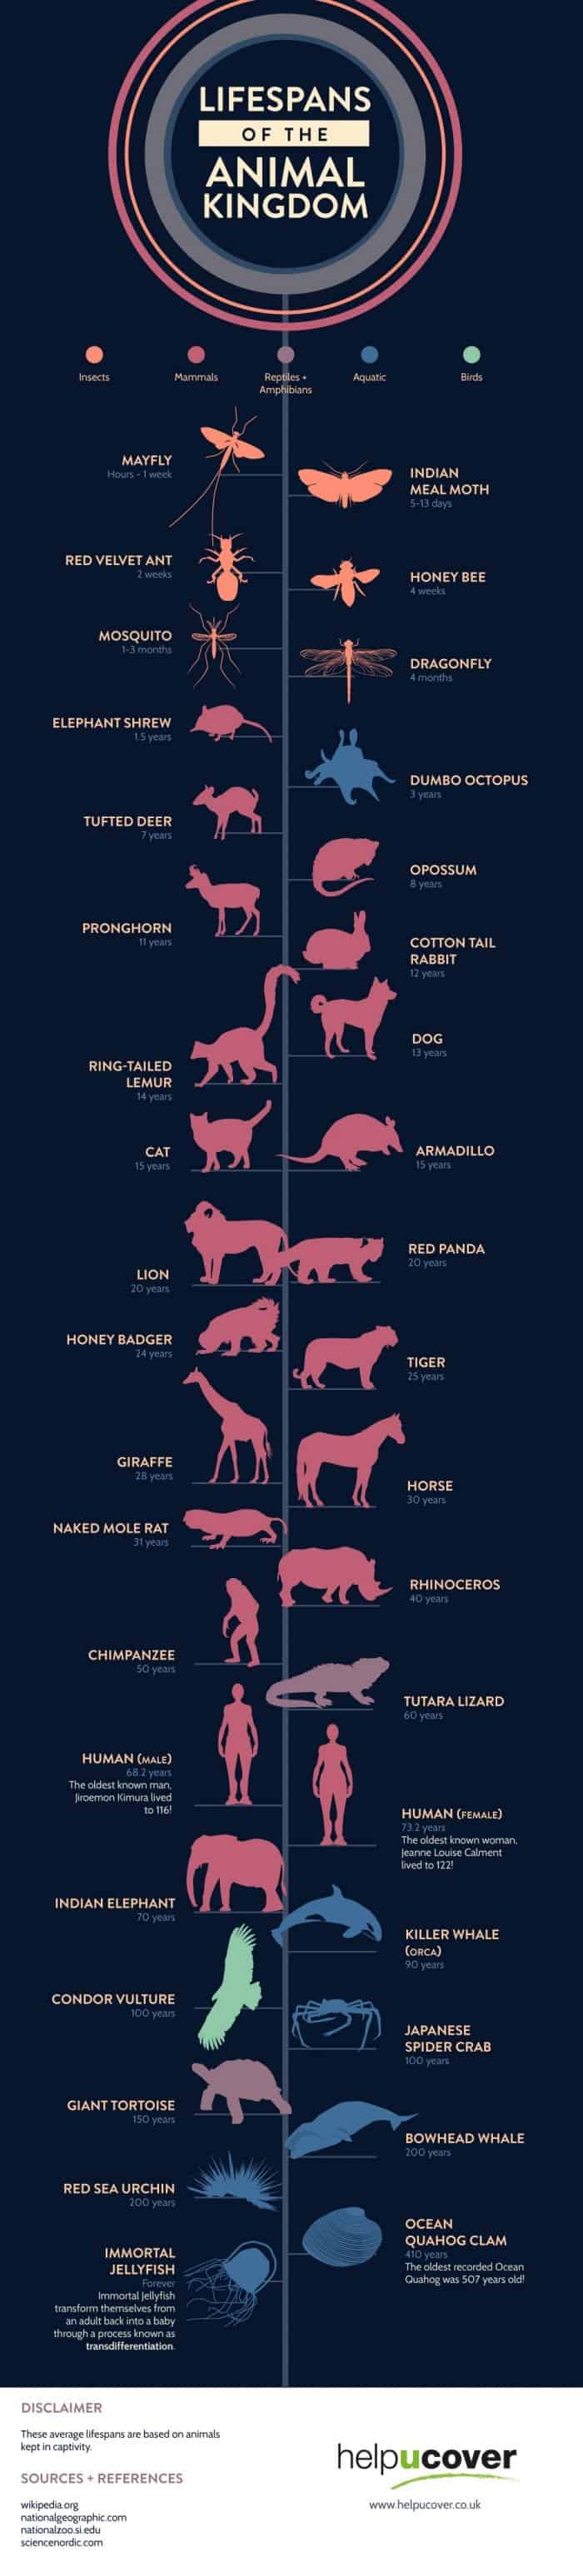 Life Spans of the Animal Kingdom [Infographic] | Daily Infographic